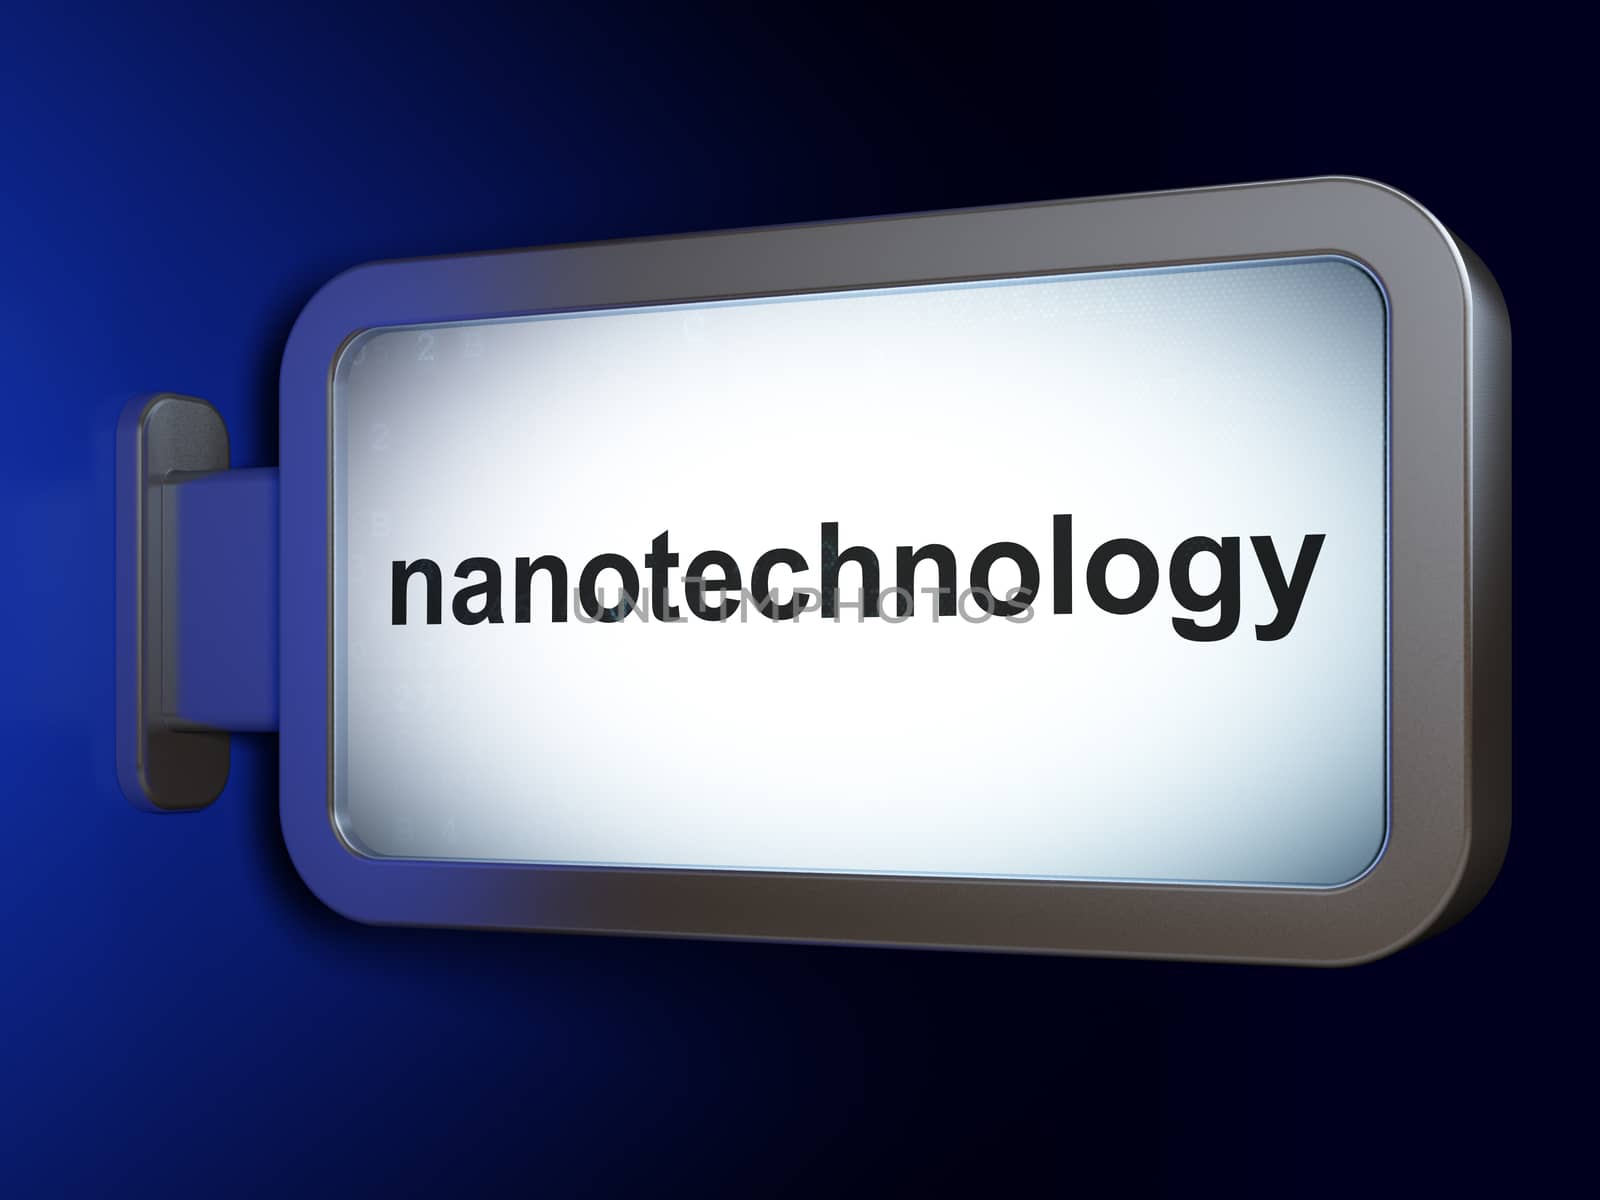 Science concept: Nanotechnology on advertising billboard background, 3D rendering